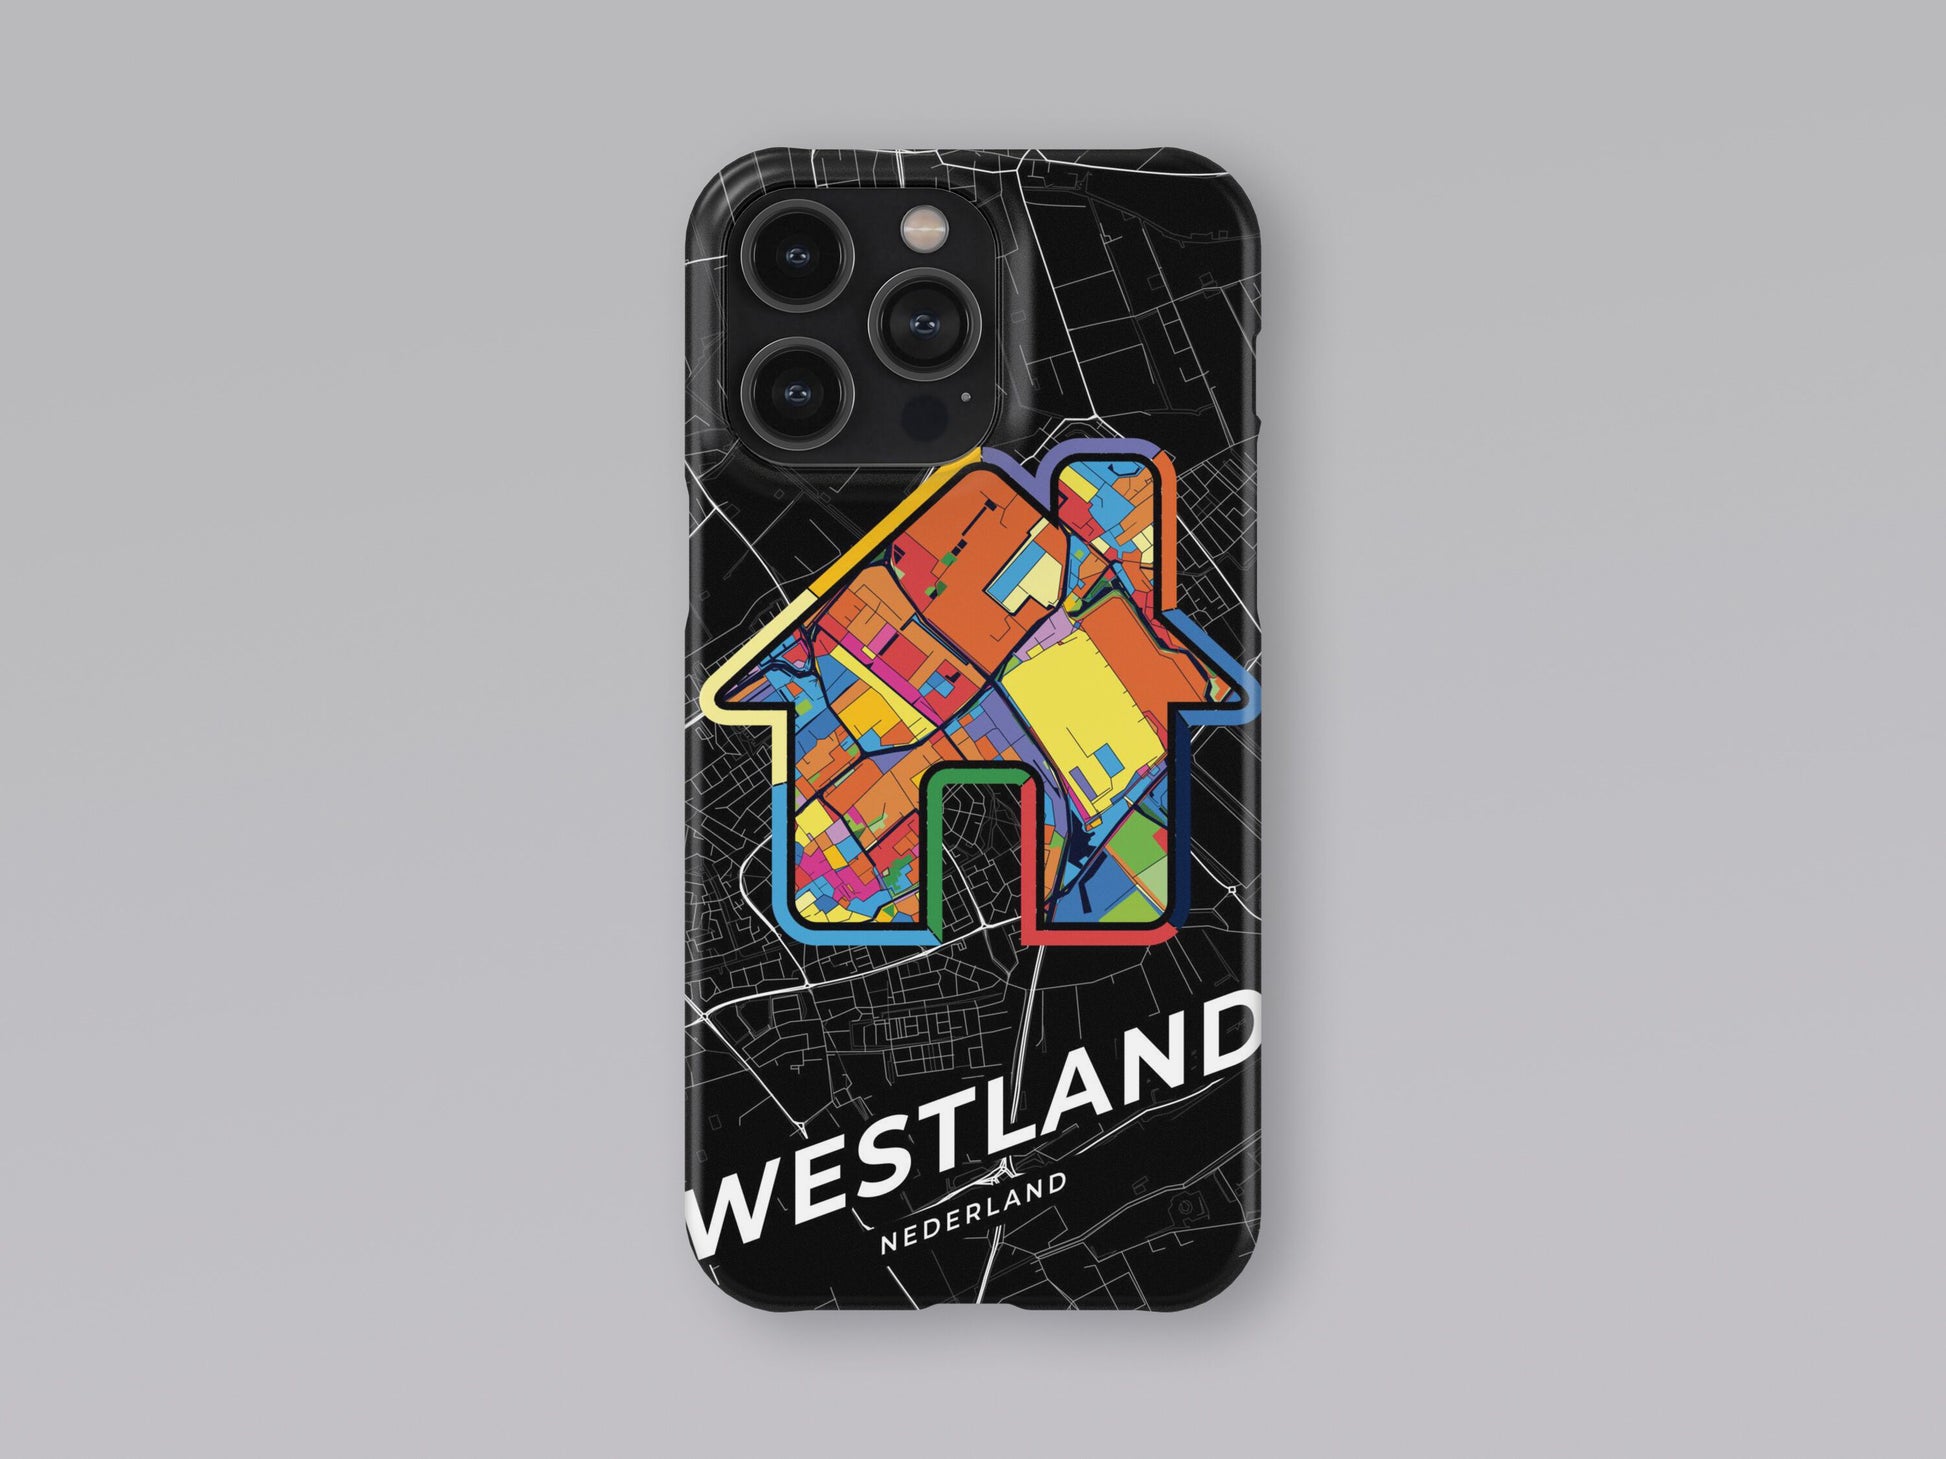 Westland Netherlands slim phone case with colorful icon 3